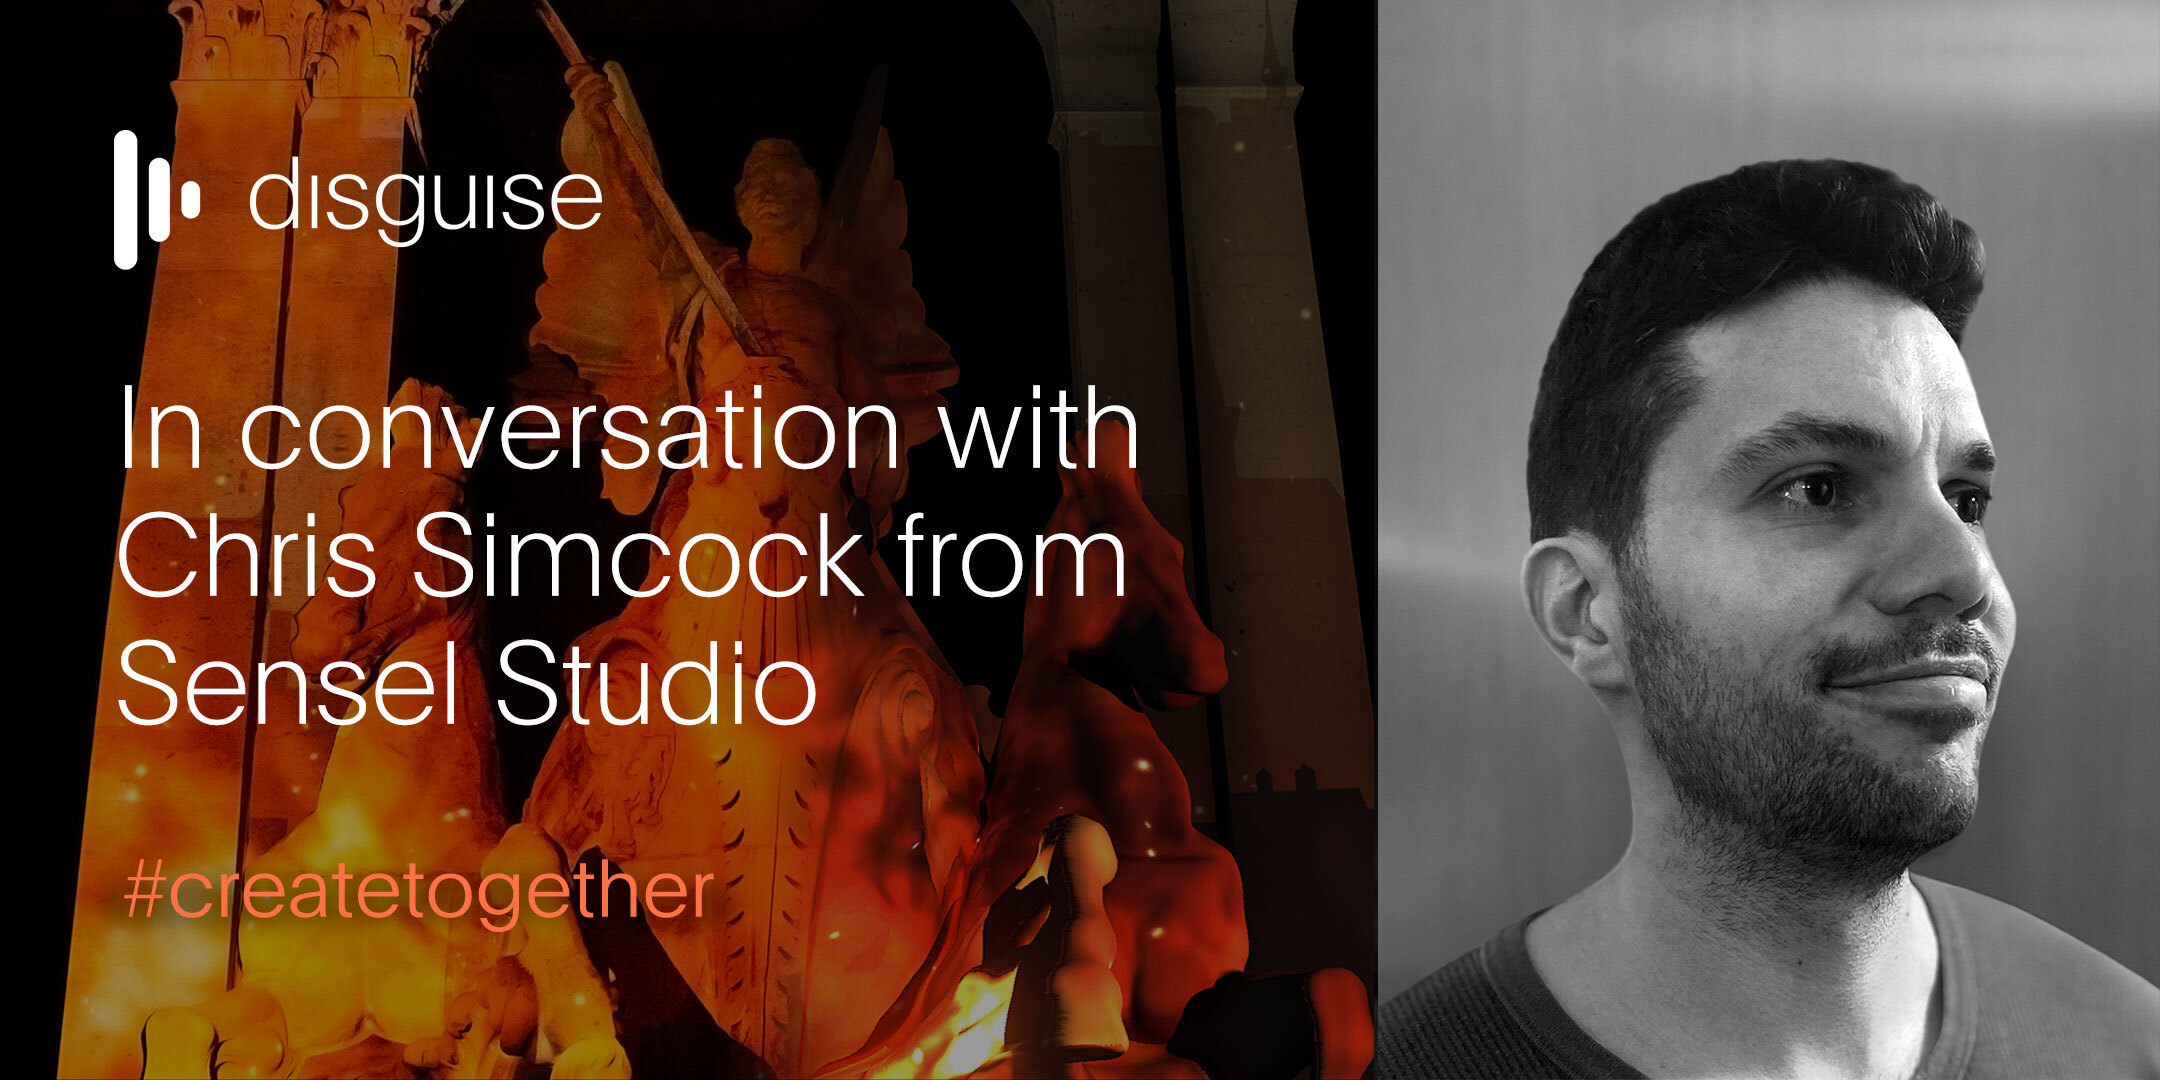 In conversation with Chris Simcock from Sensel Studio